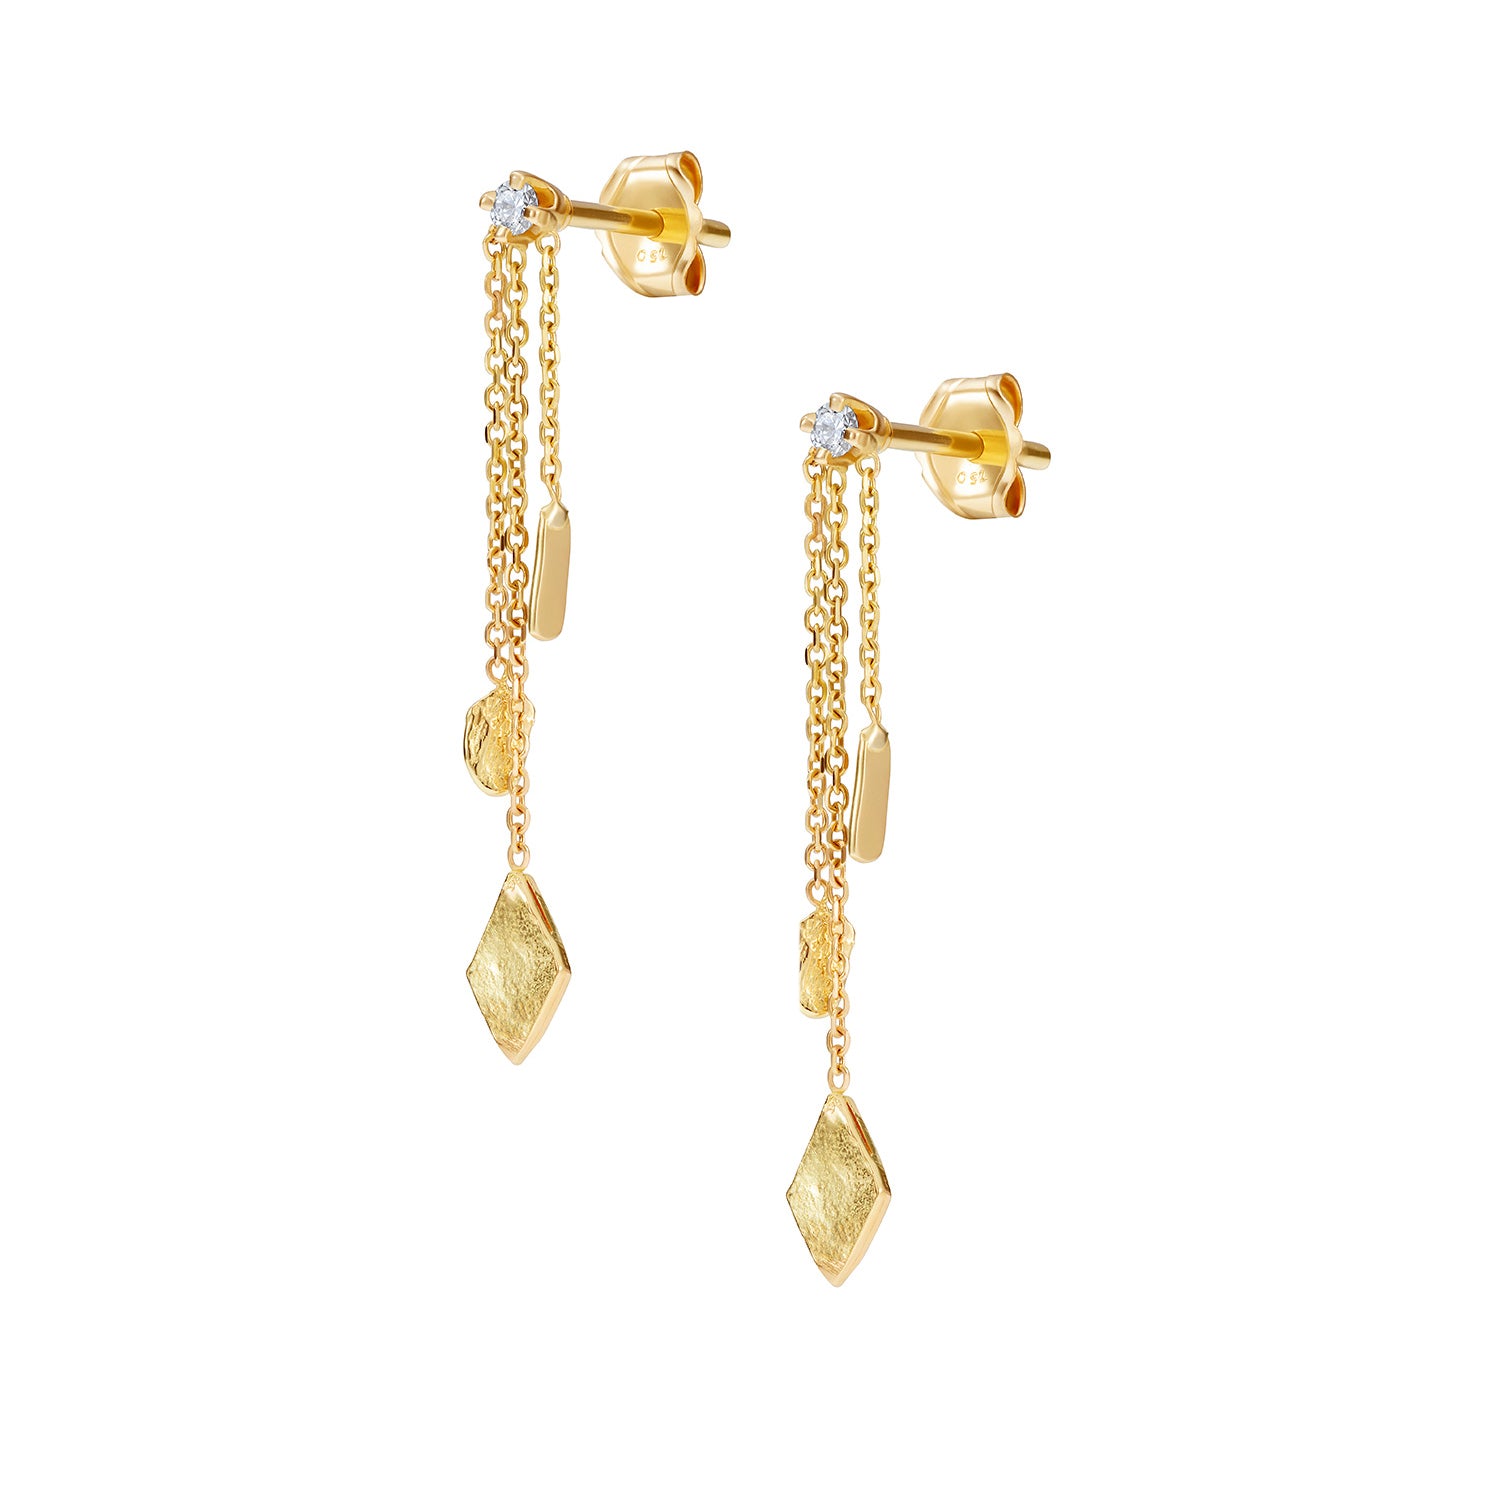 18ct Gold Diamond stud with three hanging chains and mixed Gold shapes on ends.